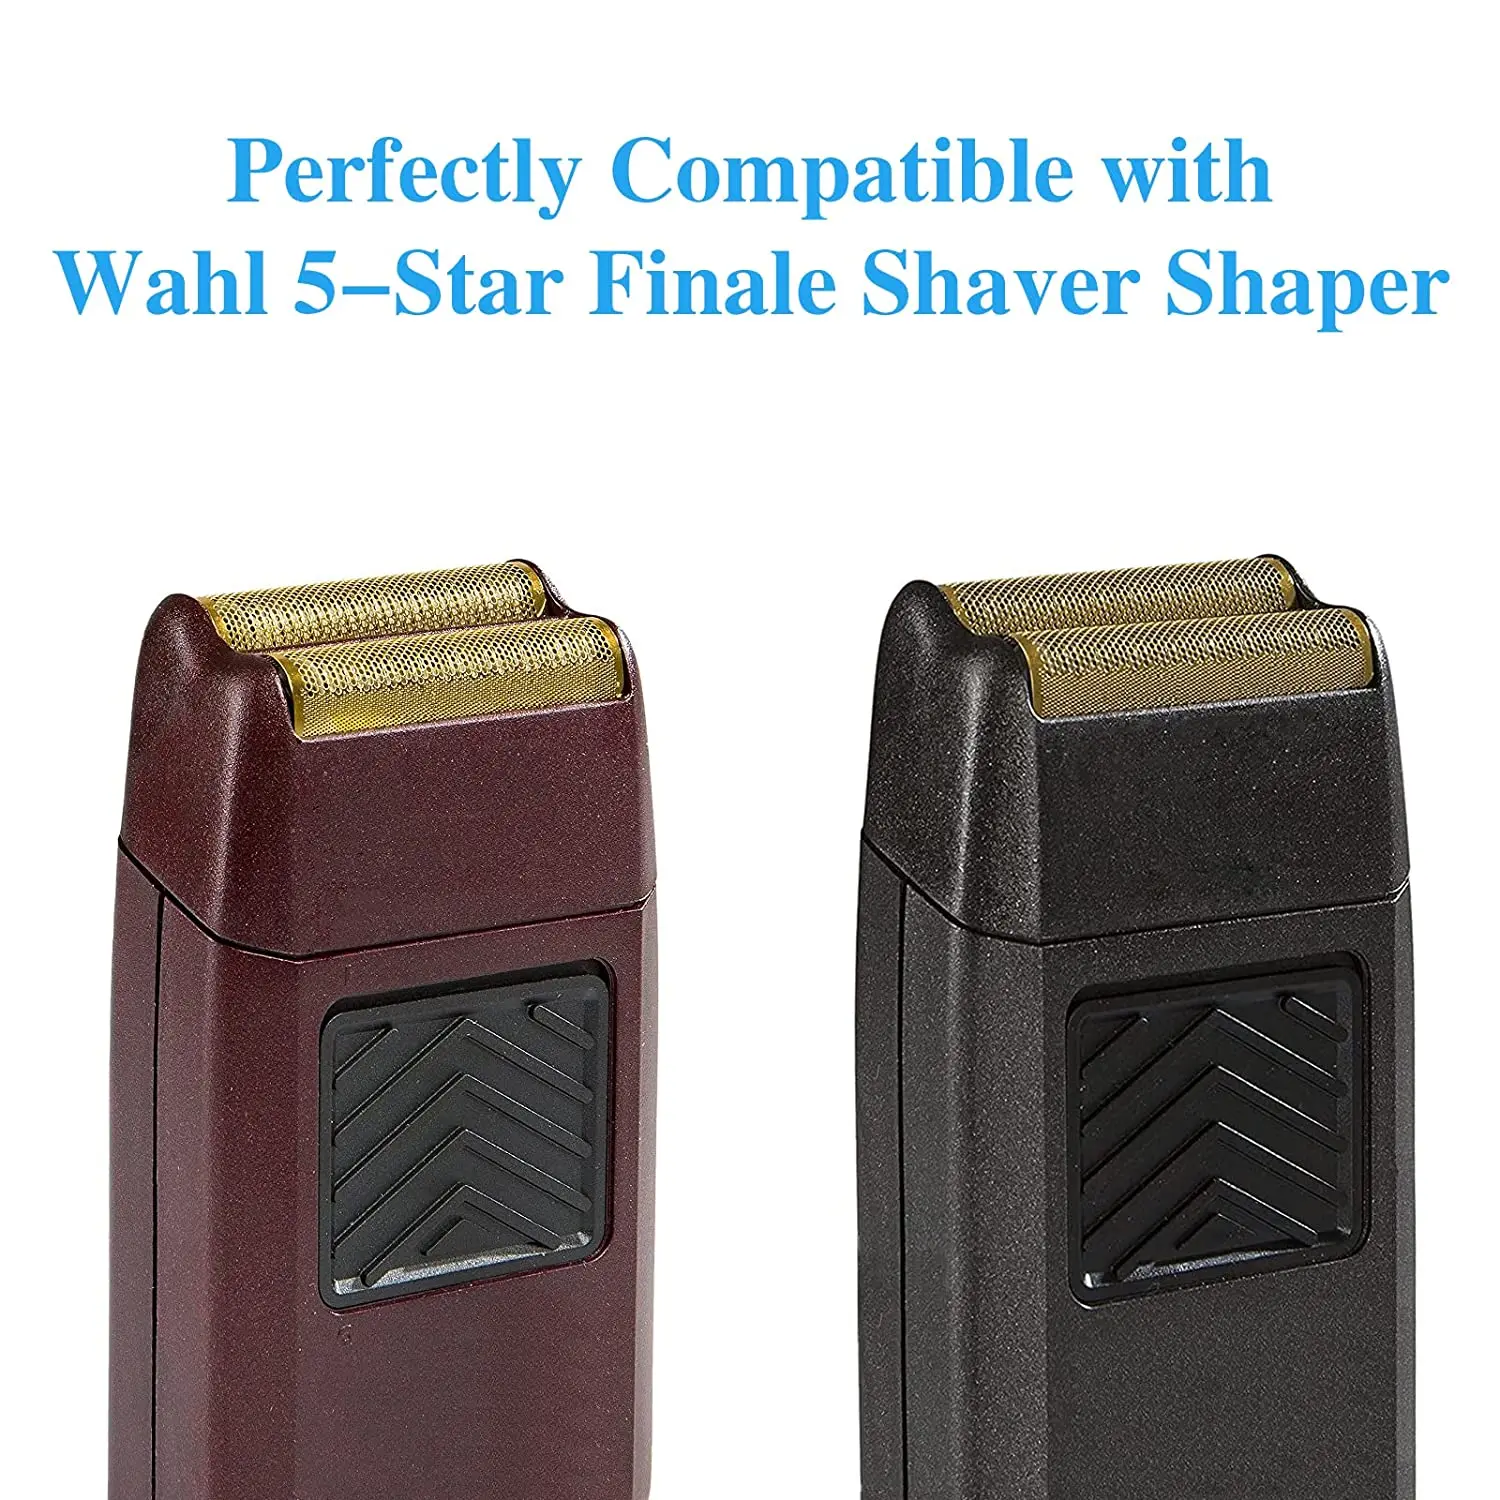 WAHL 5-Star Finale Shaver Replacement Foil & Cutter